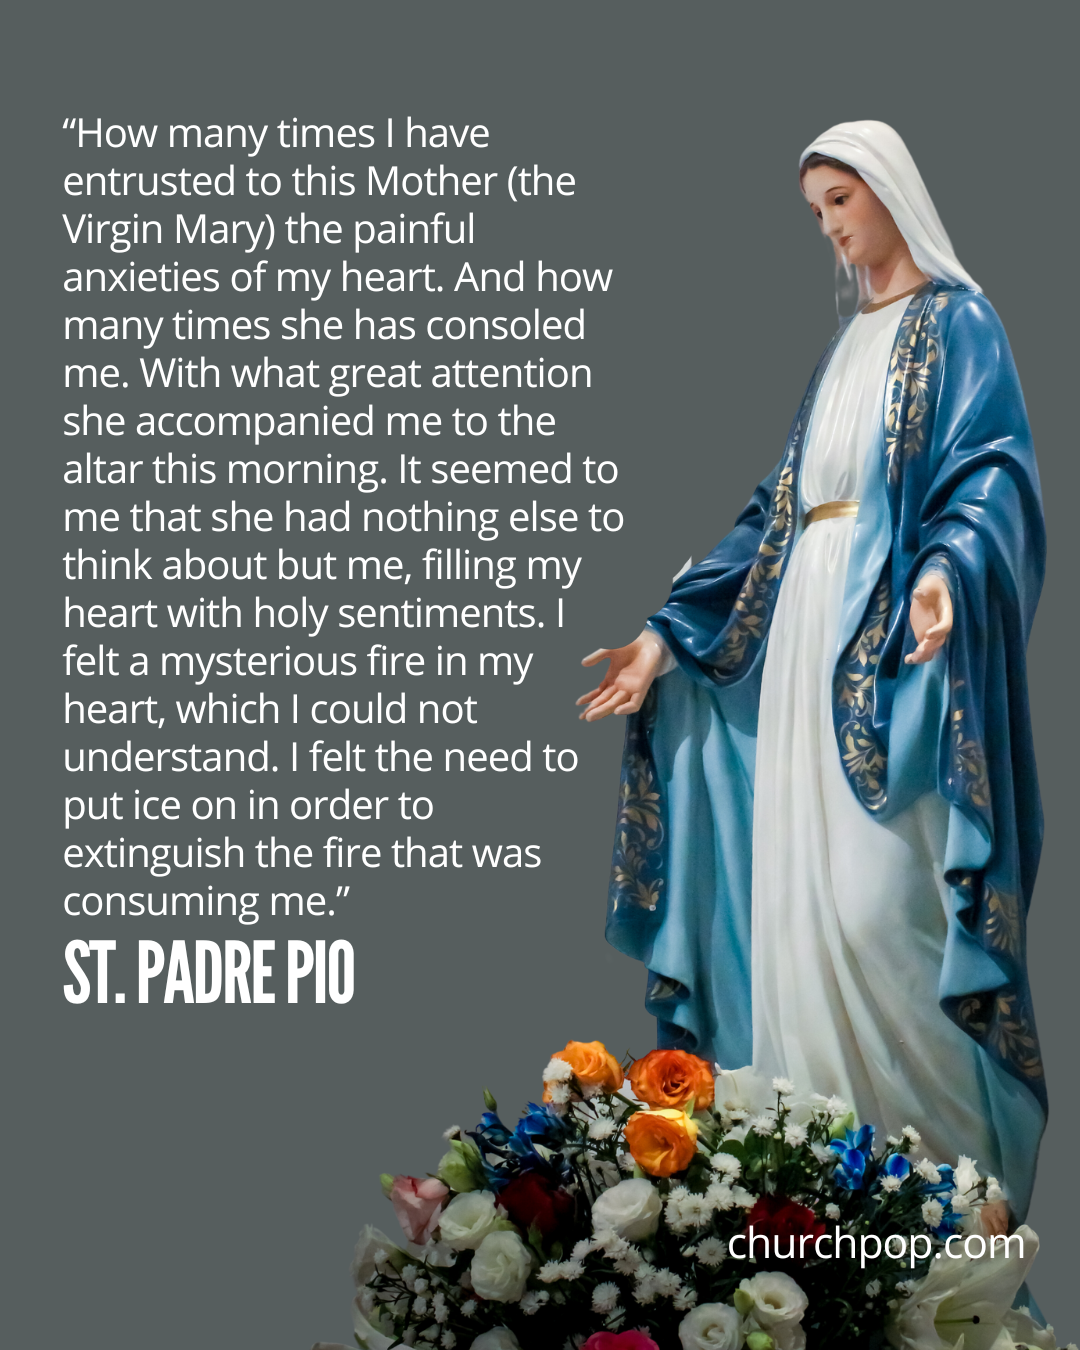 Padre Pio Quotes on Mary